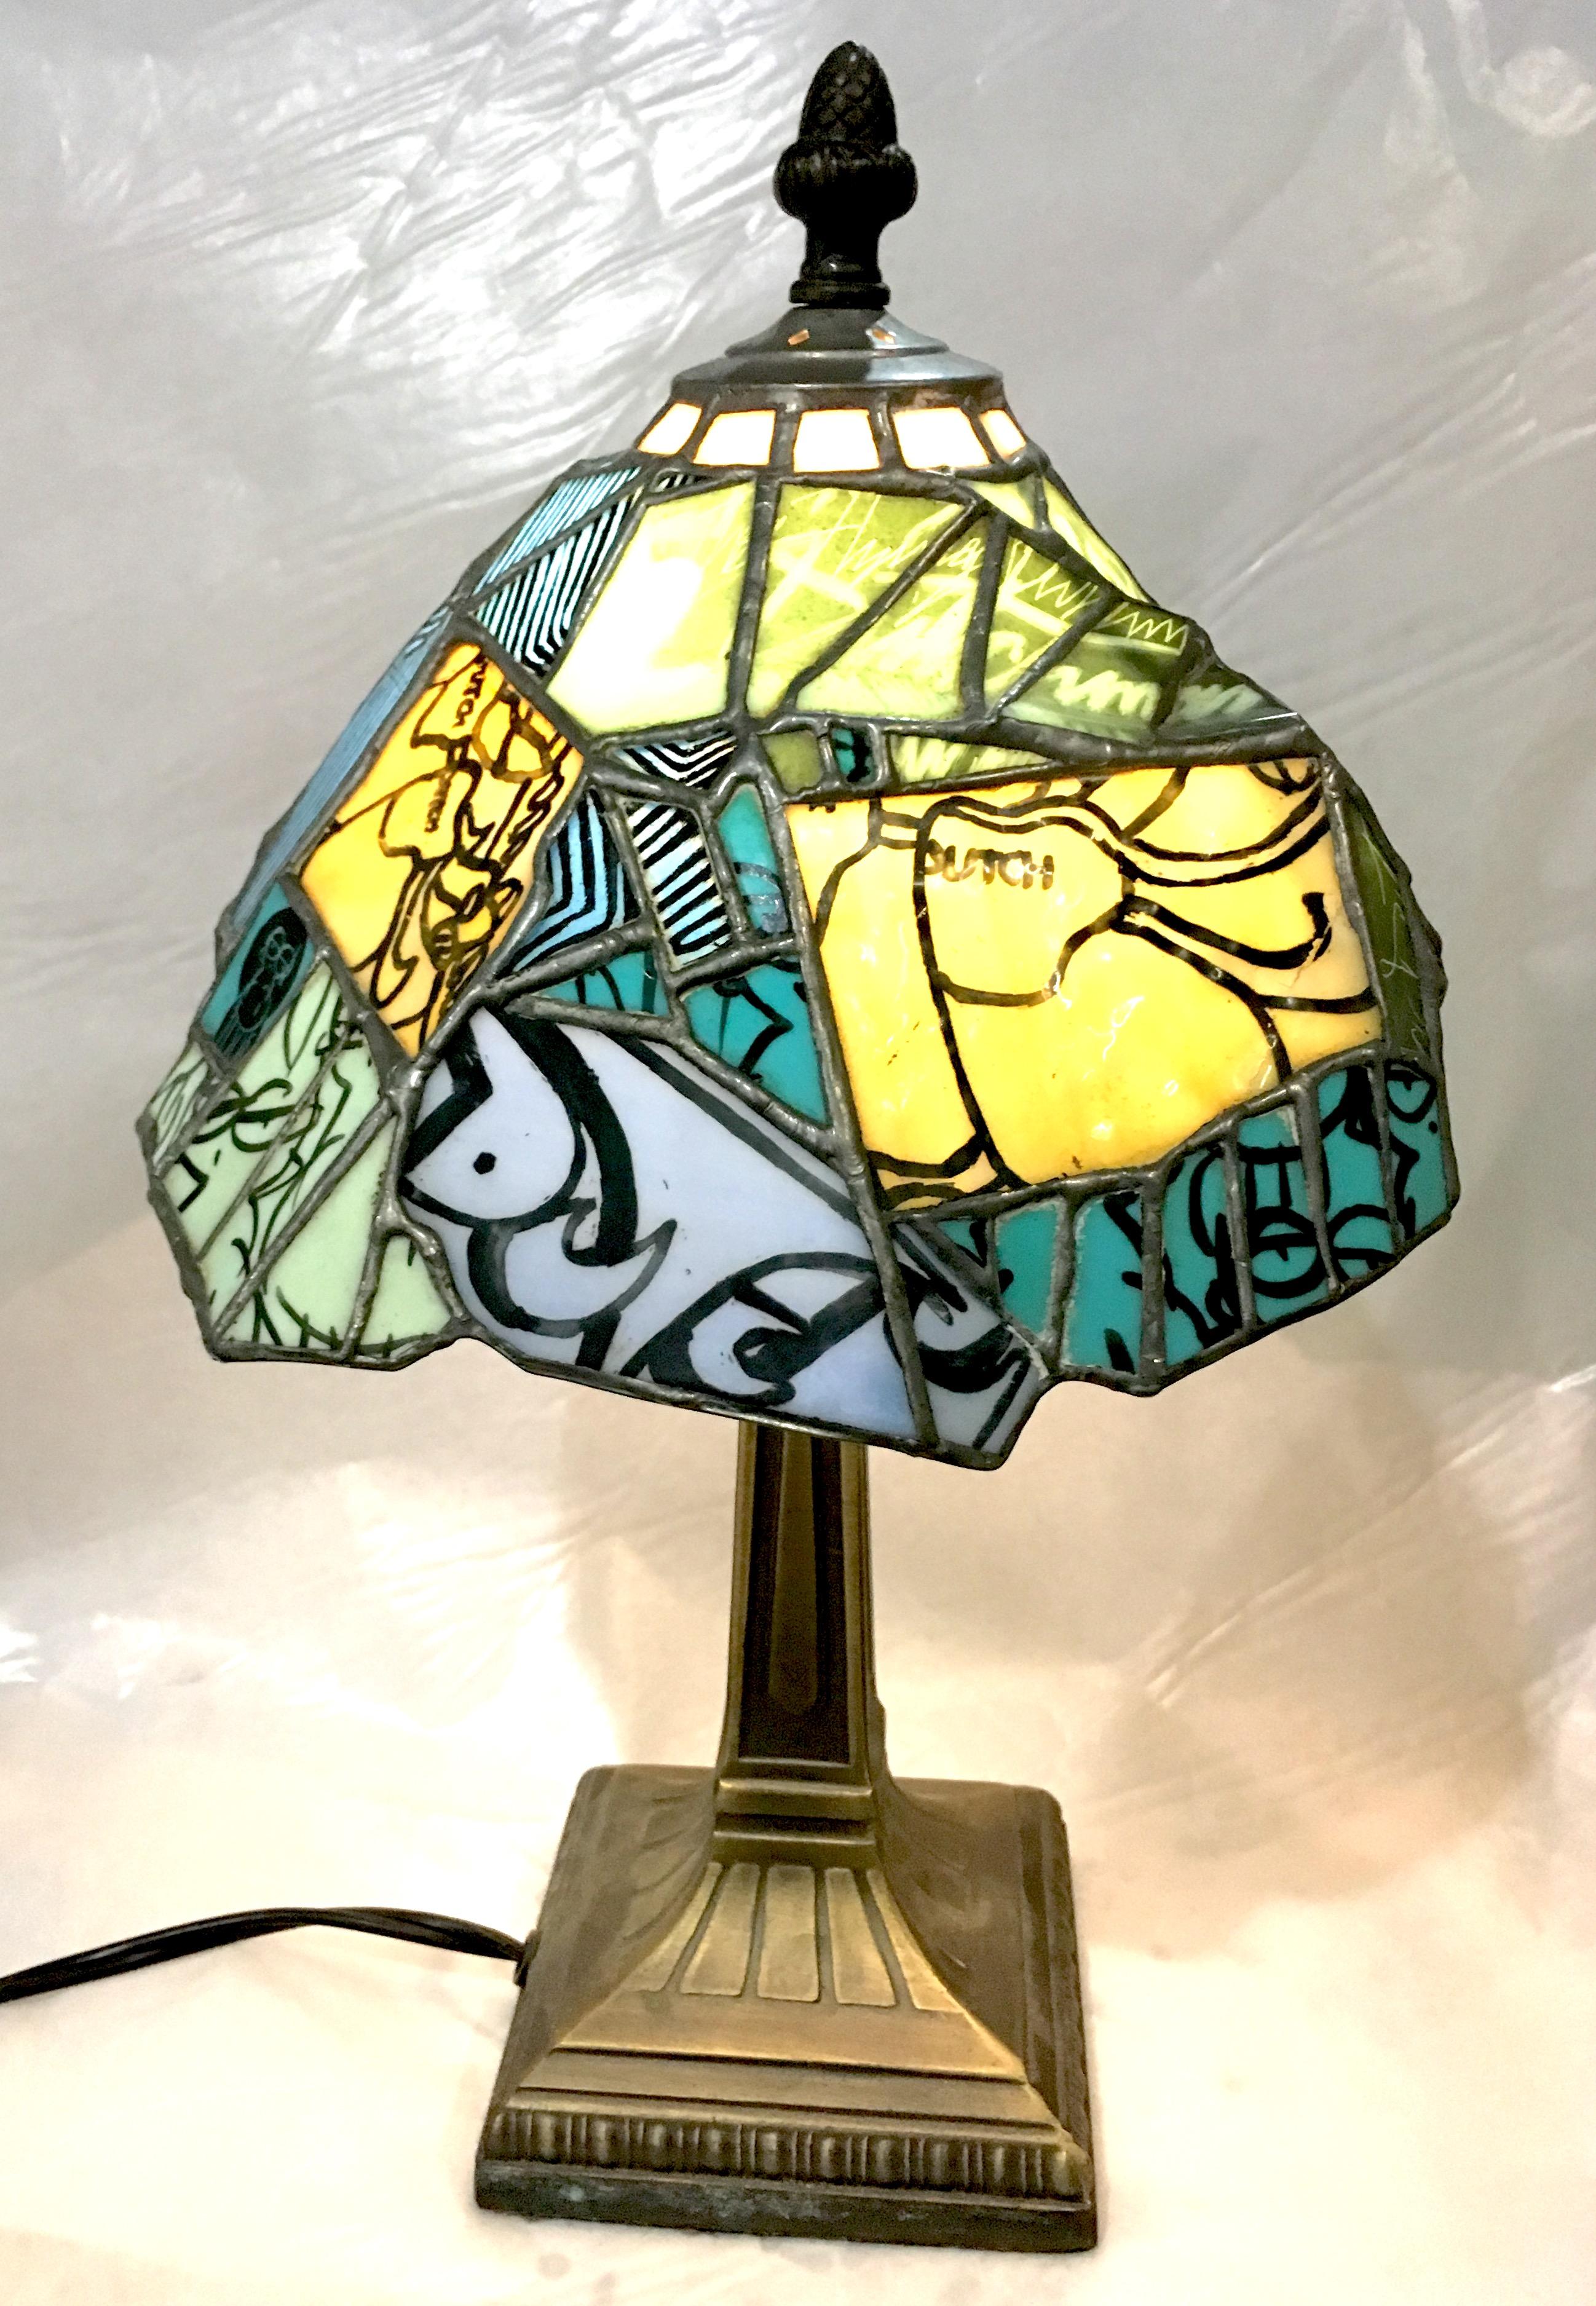 Secret Stash, 2012 (stained glass lamp) - Art by TF Dutchman